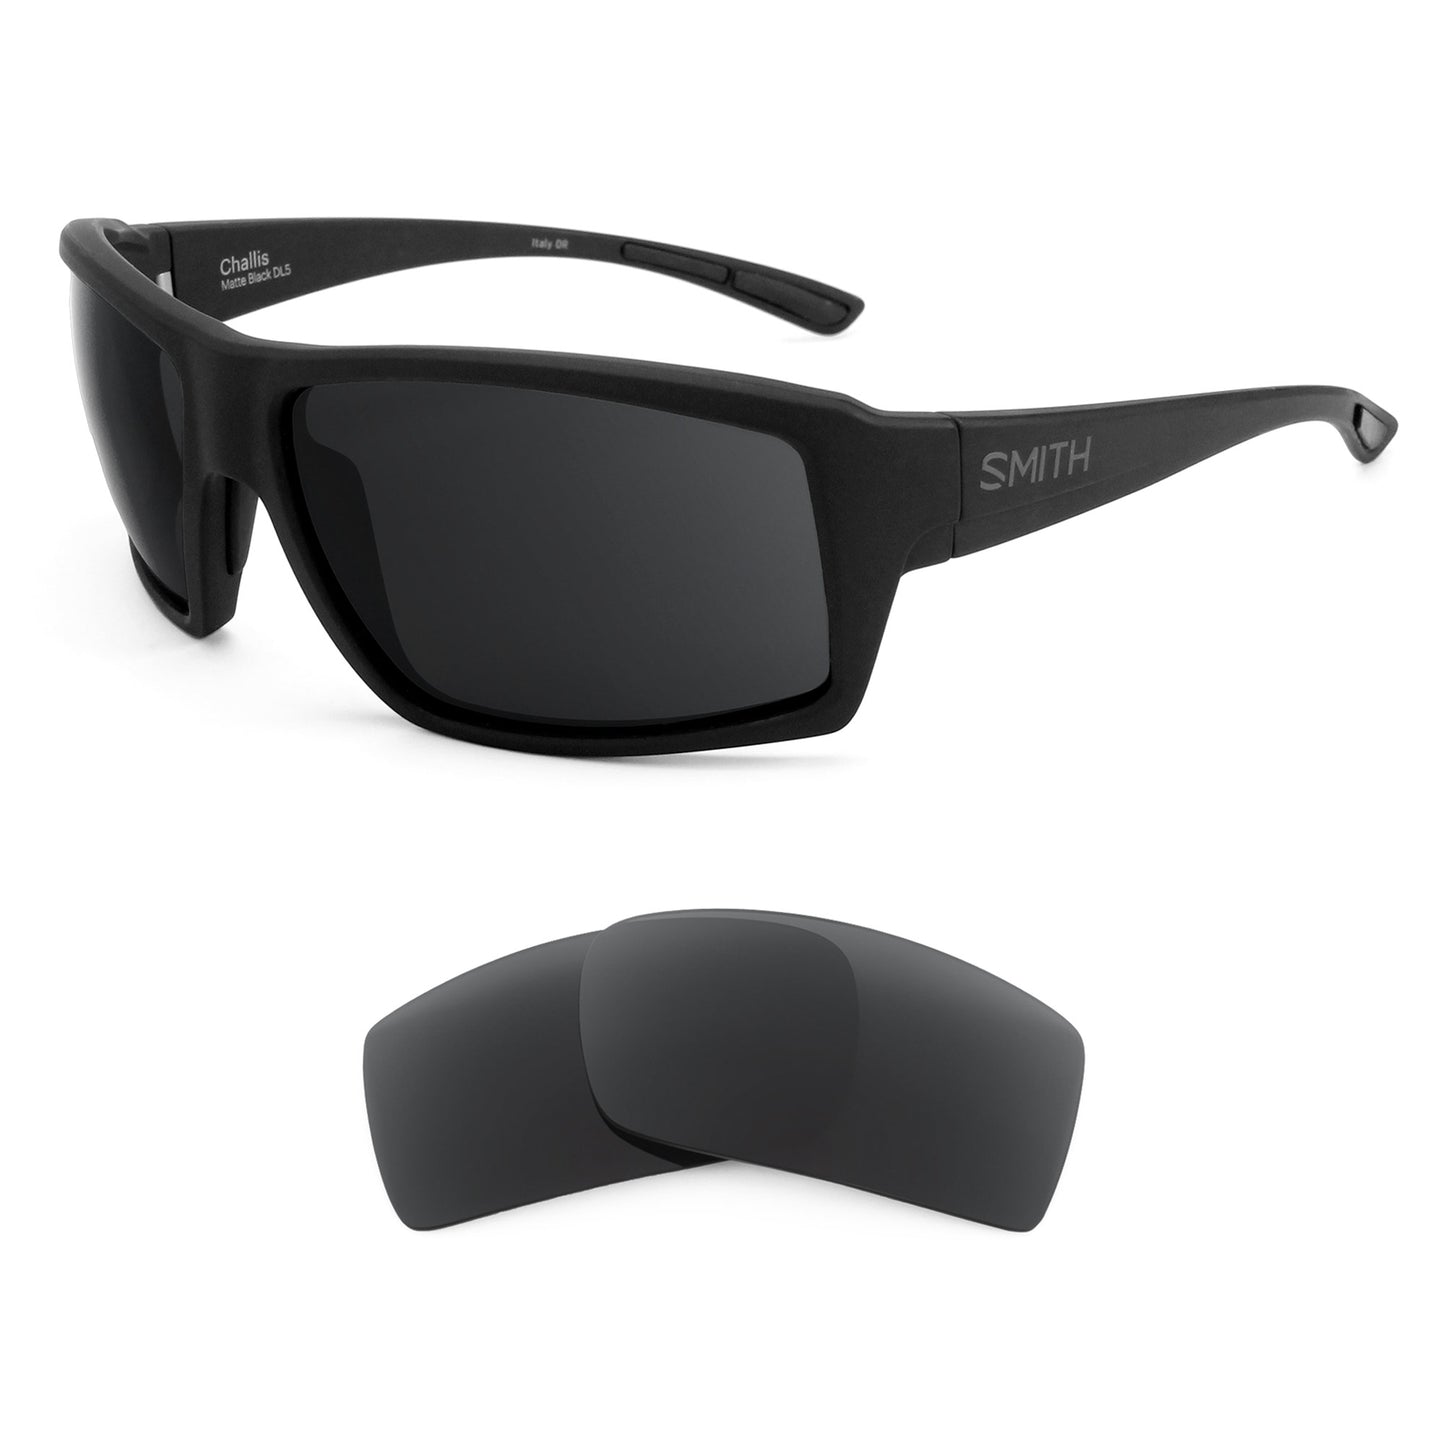 Smith Challis sunglasses with replacement lenses